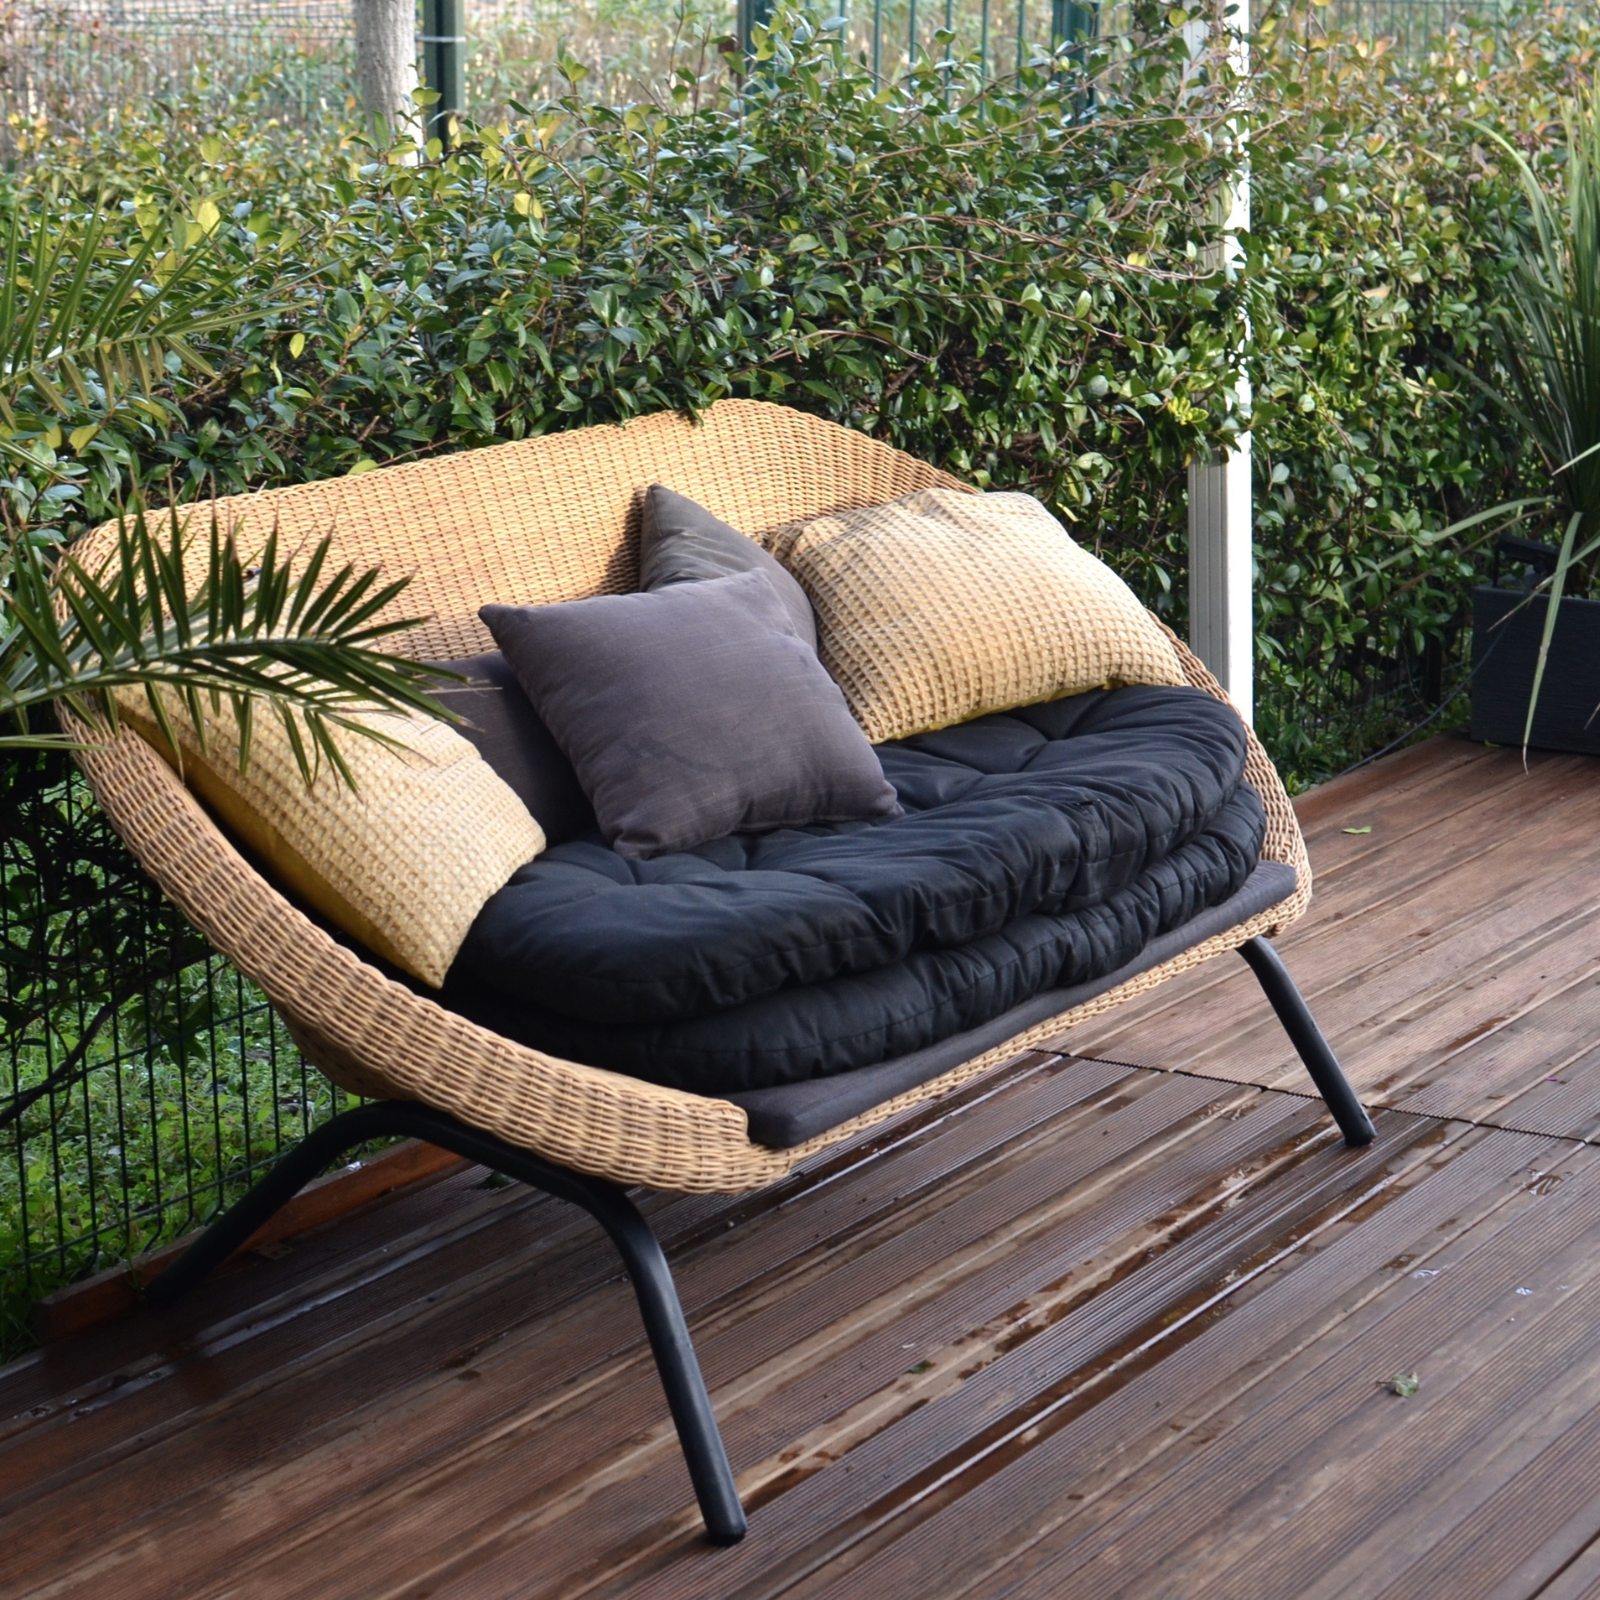 Discover the Most Effective Ways to Clean Outdoor Furniture Cushions